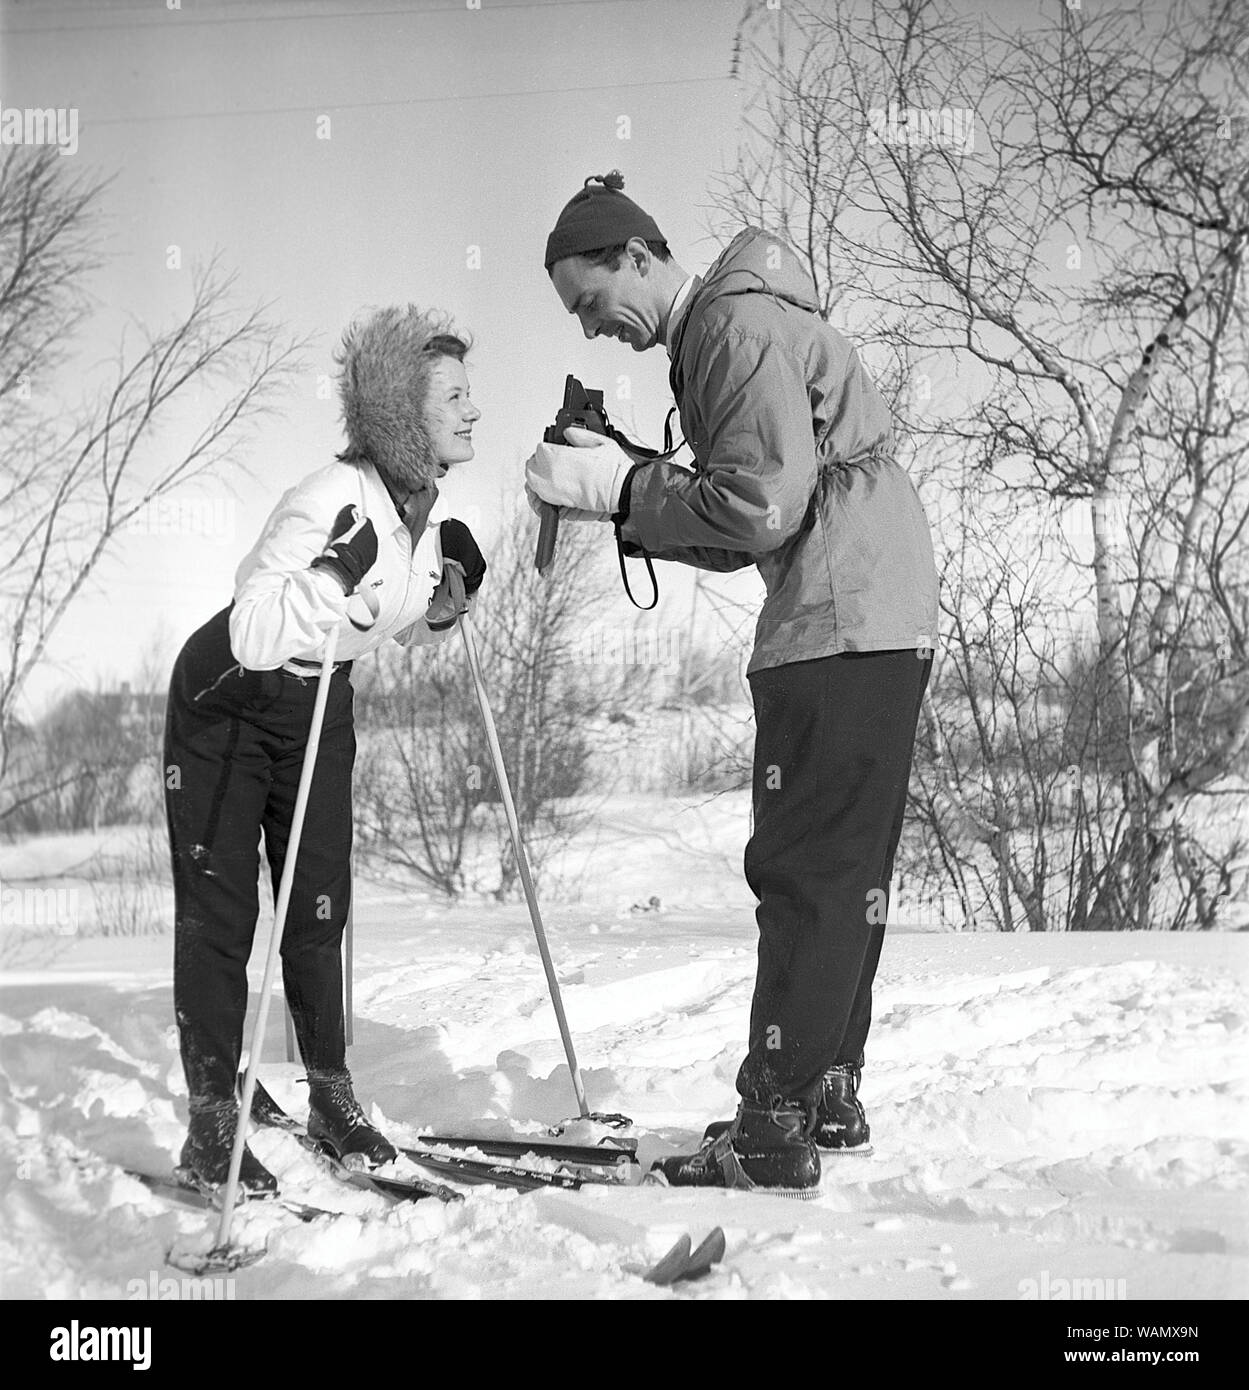 Winter in the 1940s. Actor Nils Kihlberg, 1915-1965 is pictured here with his wife Ann-Britt. He is taking pictures of her on their winter vacation. They are both wearing winter clothes and skis.  The camera is a Rolleiflex by german company Rollei.  Sweden 1943. Kristoffersson Ref D70-2 Stock Photo